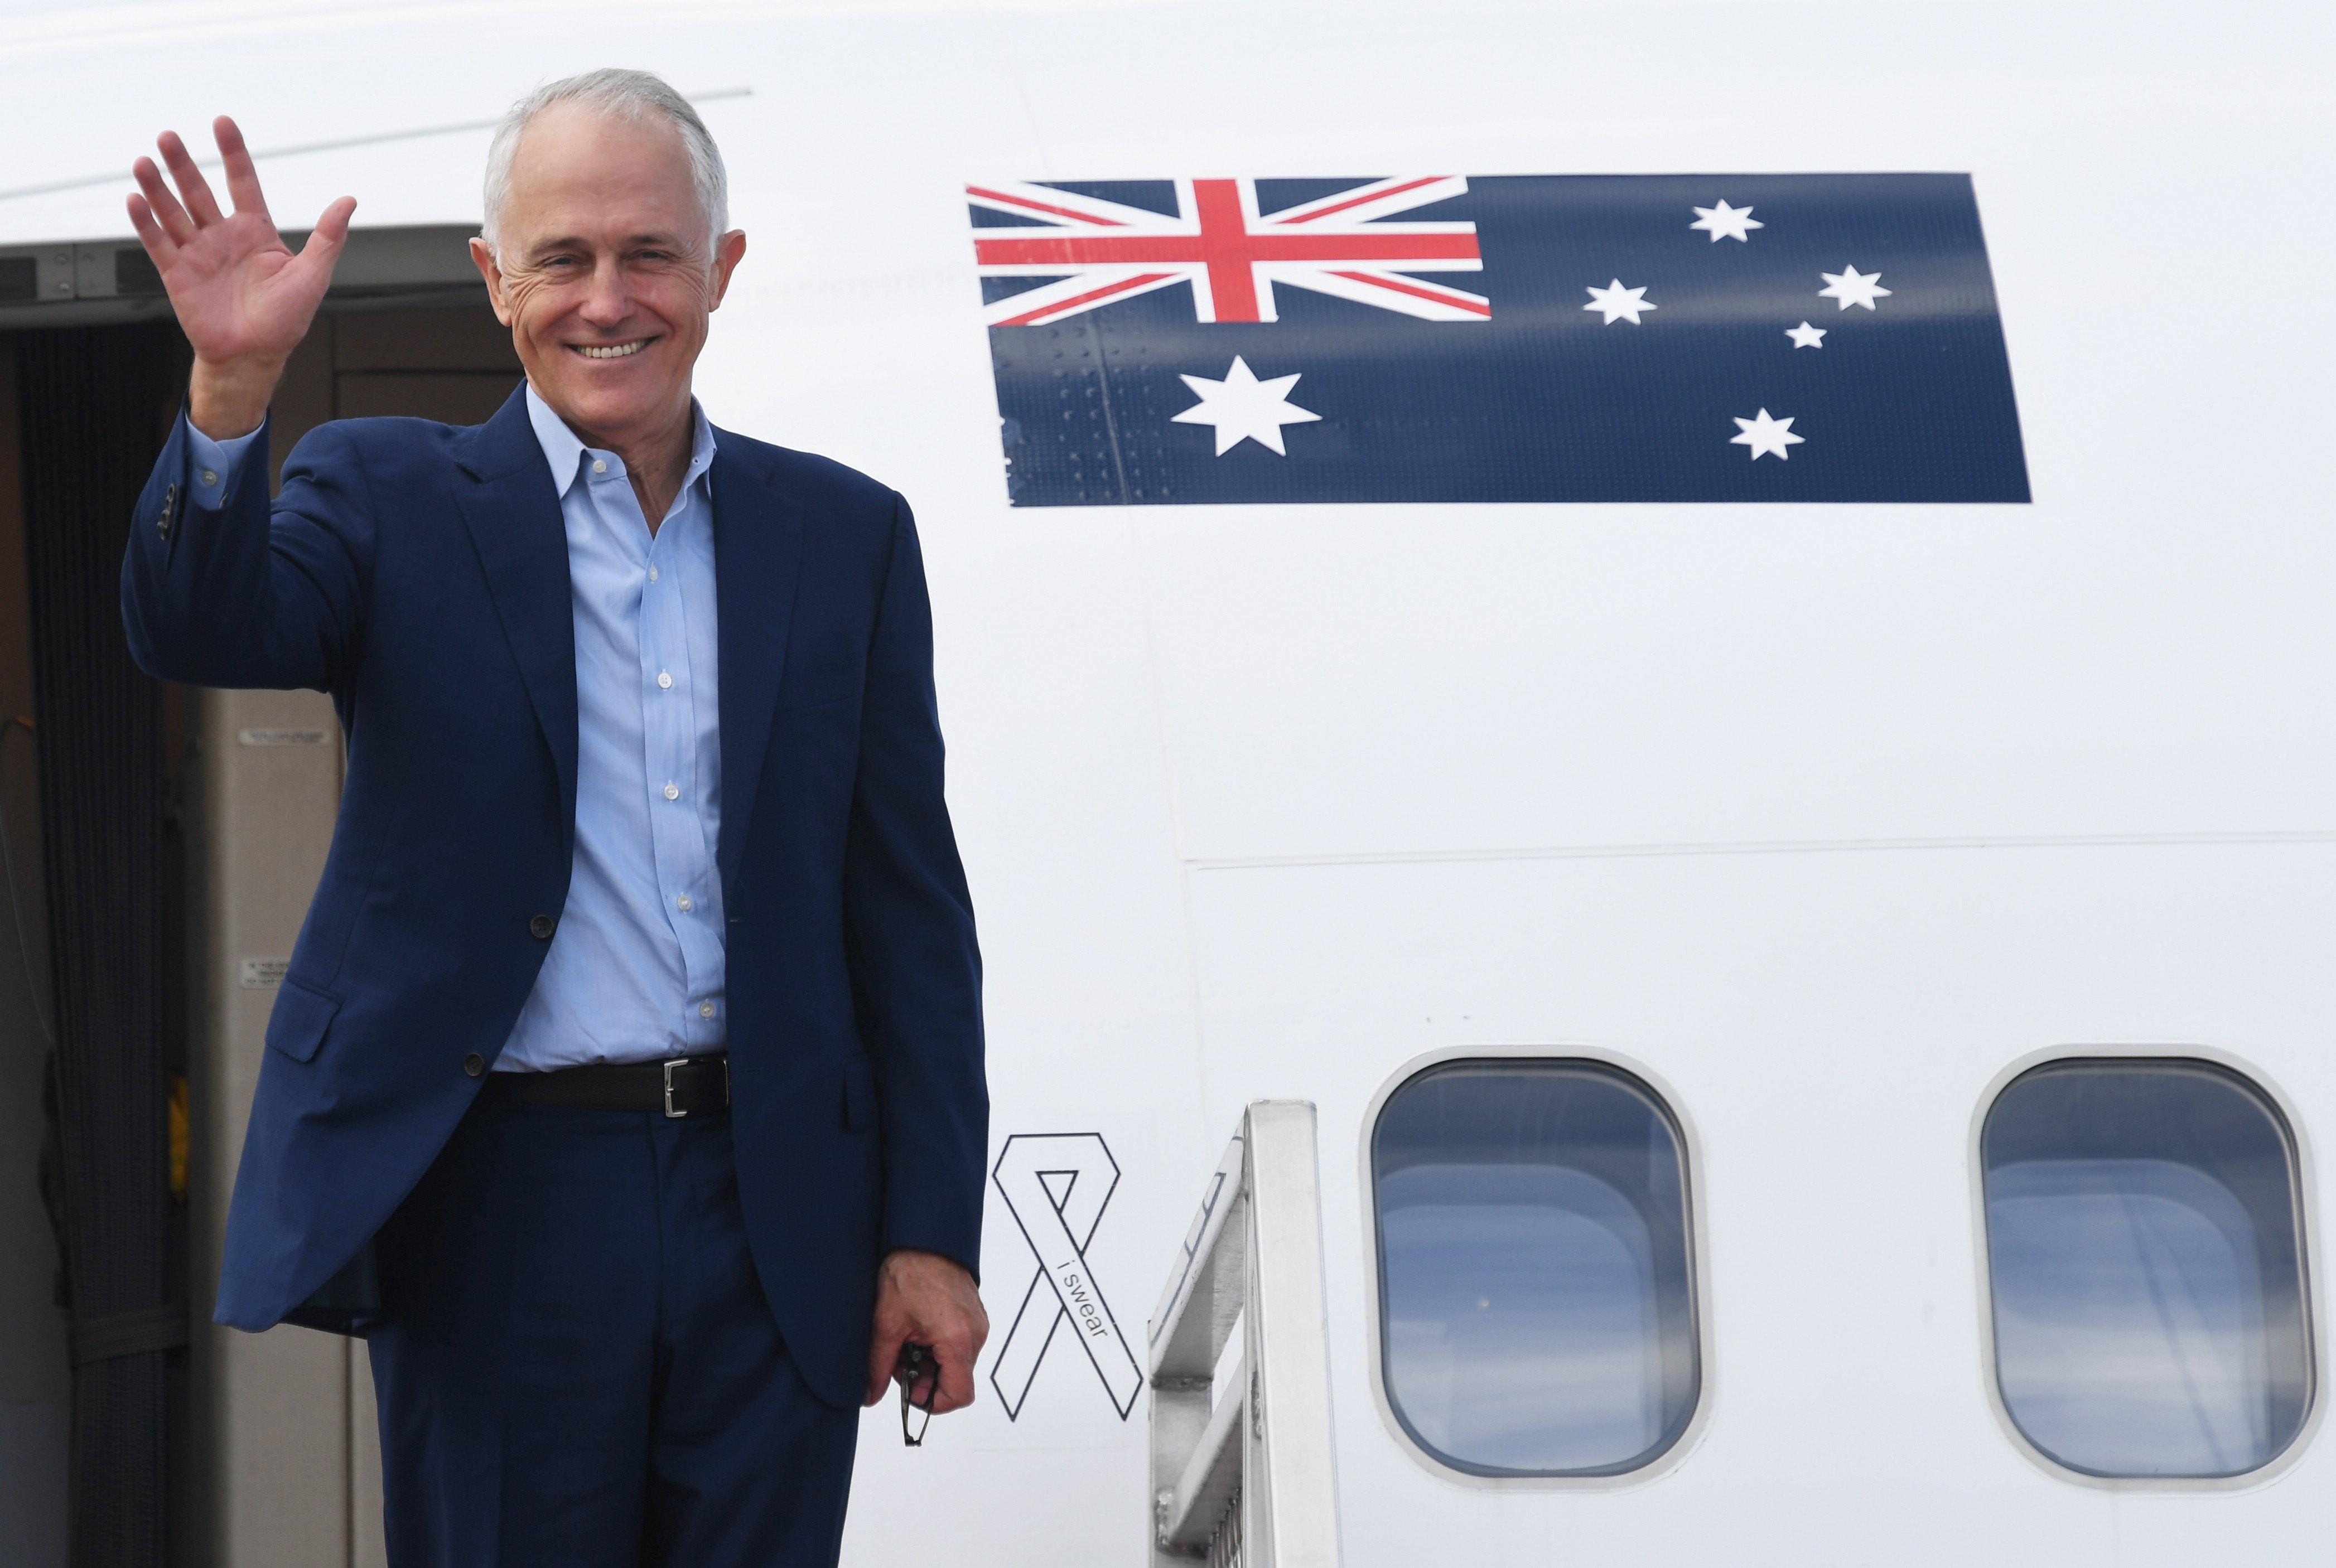 Australian Prime Minister Malcolm Turnbull waves as he boards a plane in Sydney bound for the US, where he will meet President Donald Trump. Photo: EPA